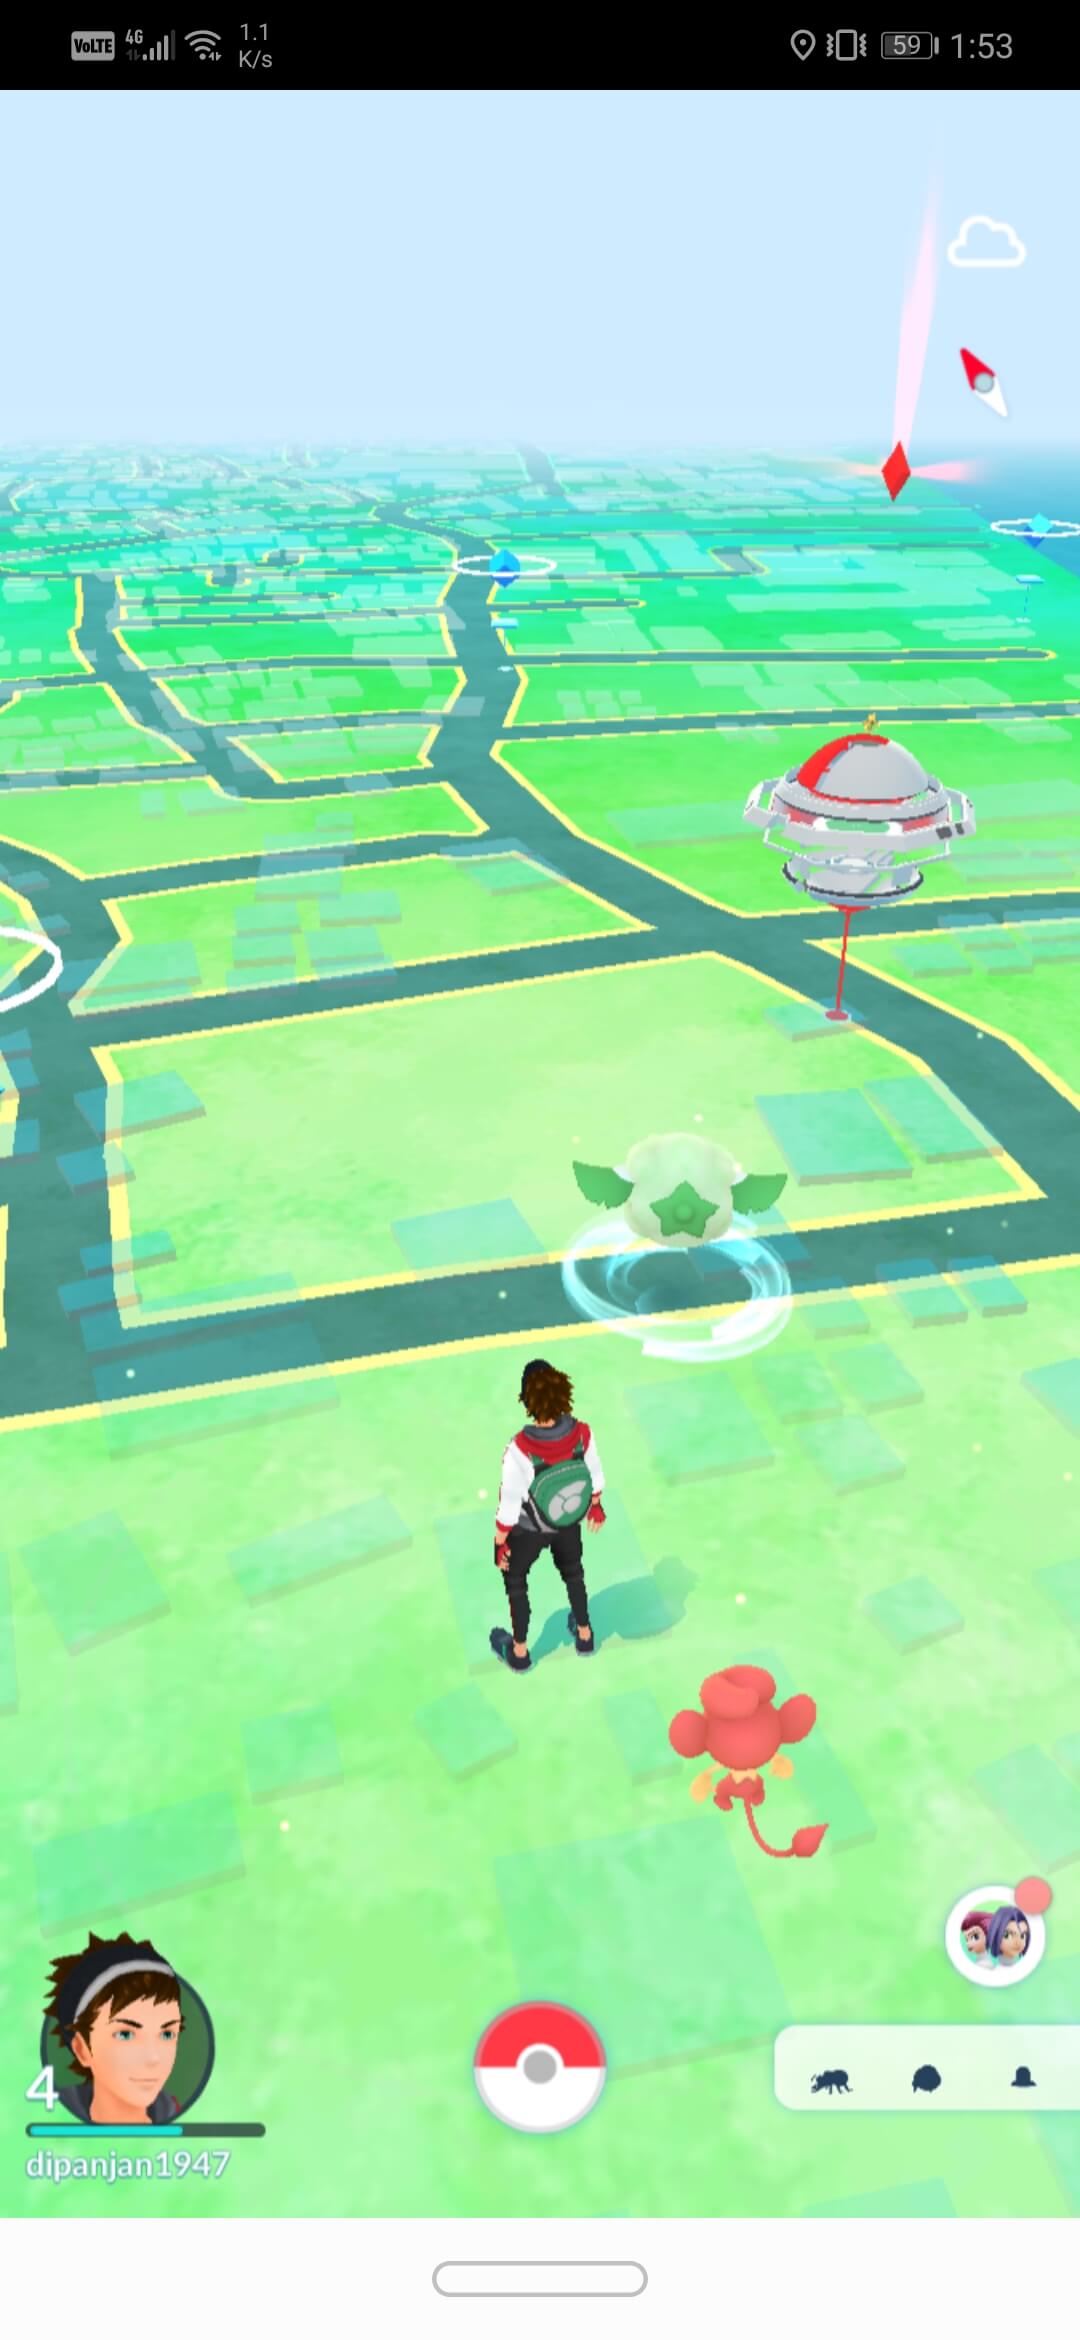 tap on the Pokéball button at the bottom center of the screen. | Change Pokémon Go Team